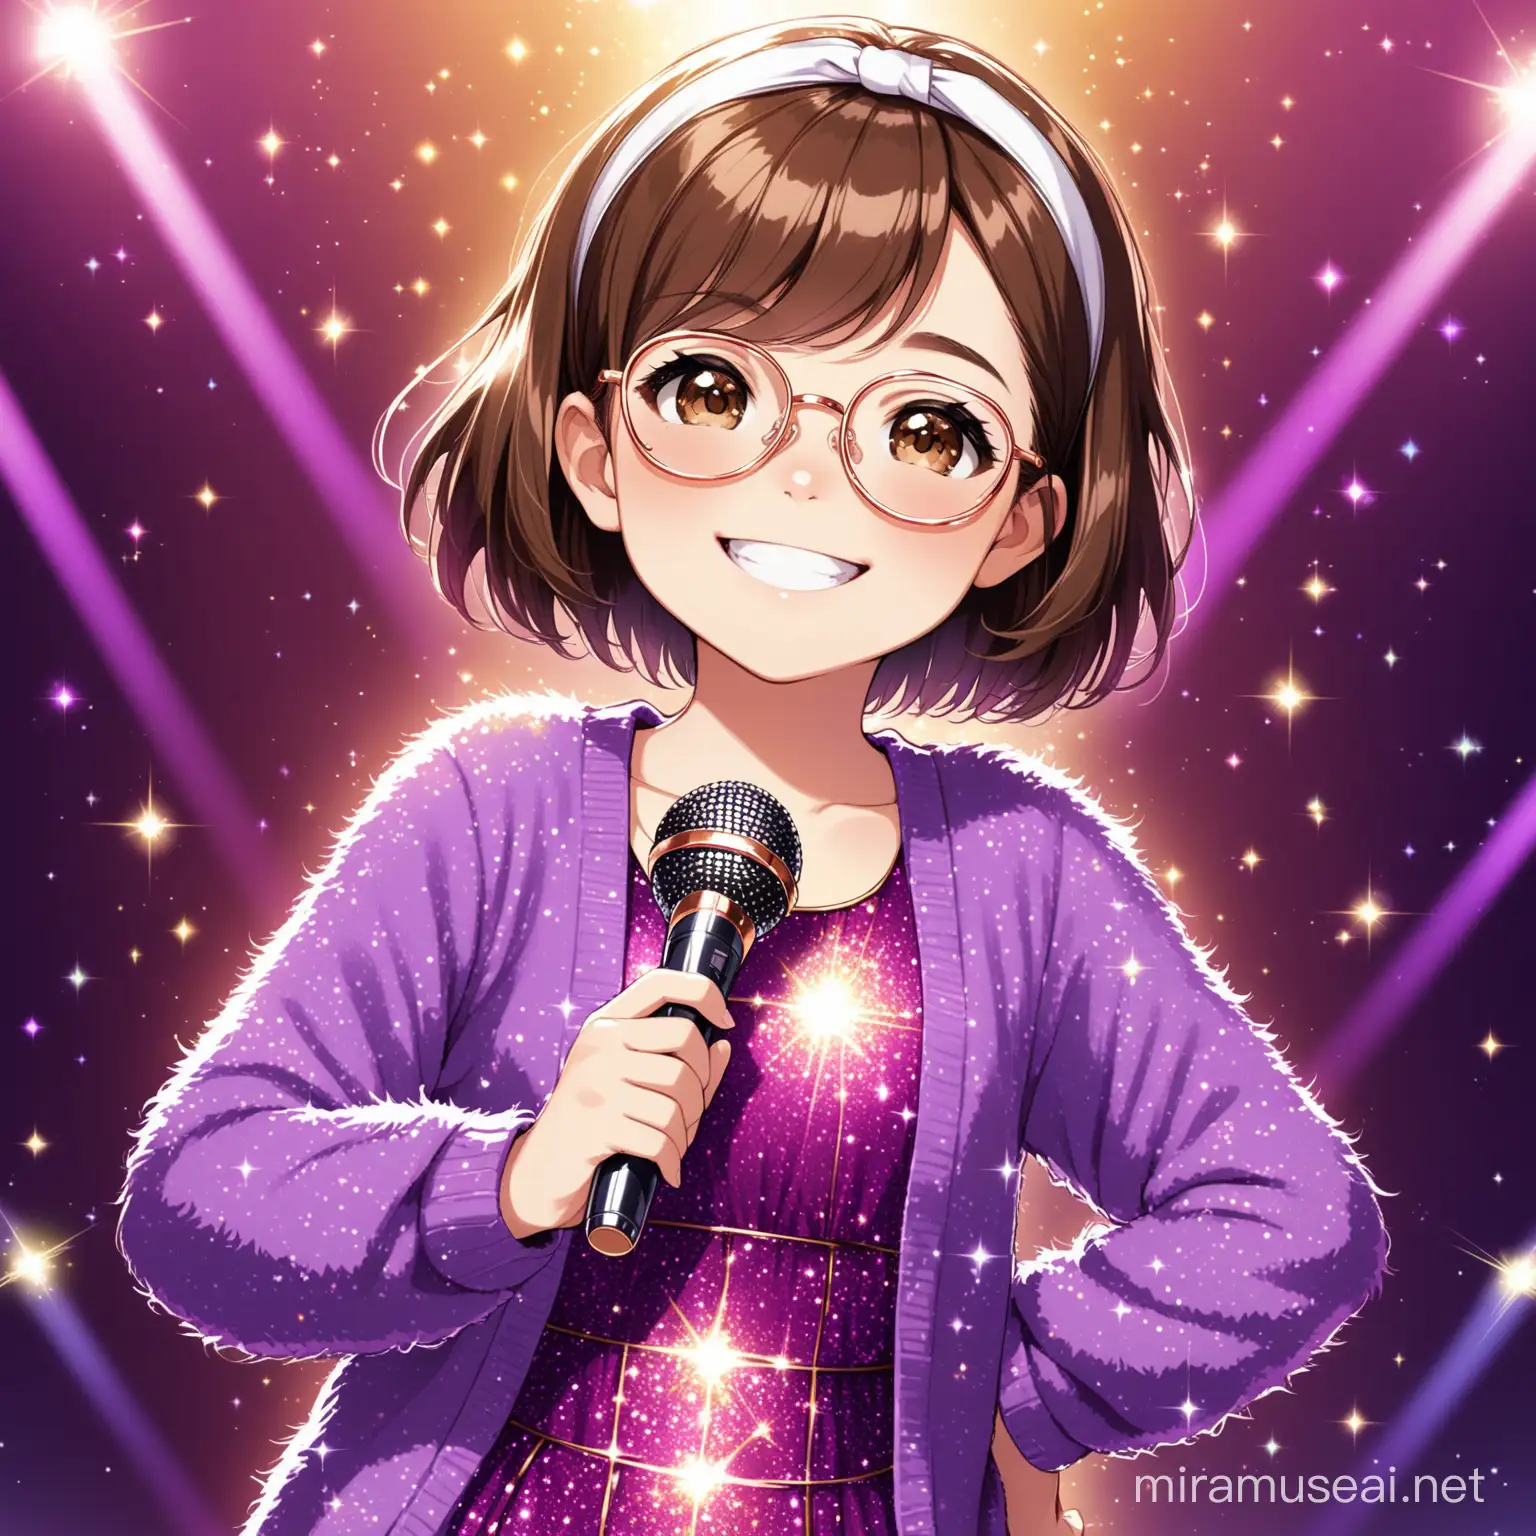 12 year old girl with short brown hair, brown eyes, rose gold glasses, smiling, wearing white head band, wearing a glittery purple knee length dress and furry purple cardigan, holding a sparkly purple microphone